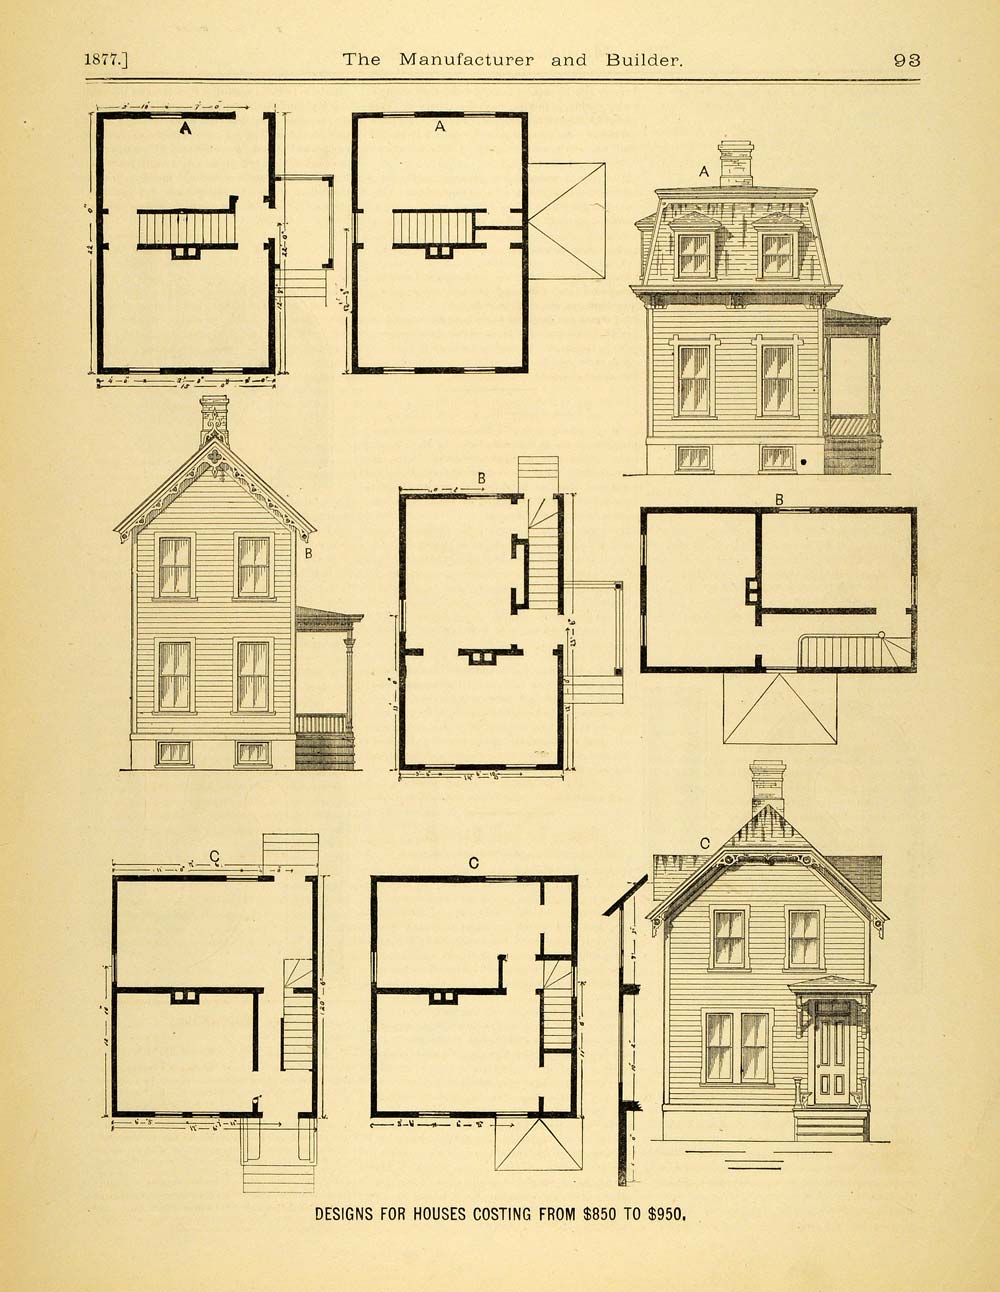 1877 Print Victorian Architecture Design Houses D. B. Provoost Floor Plans MAB1